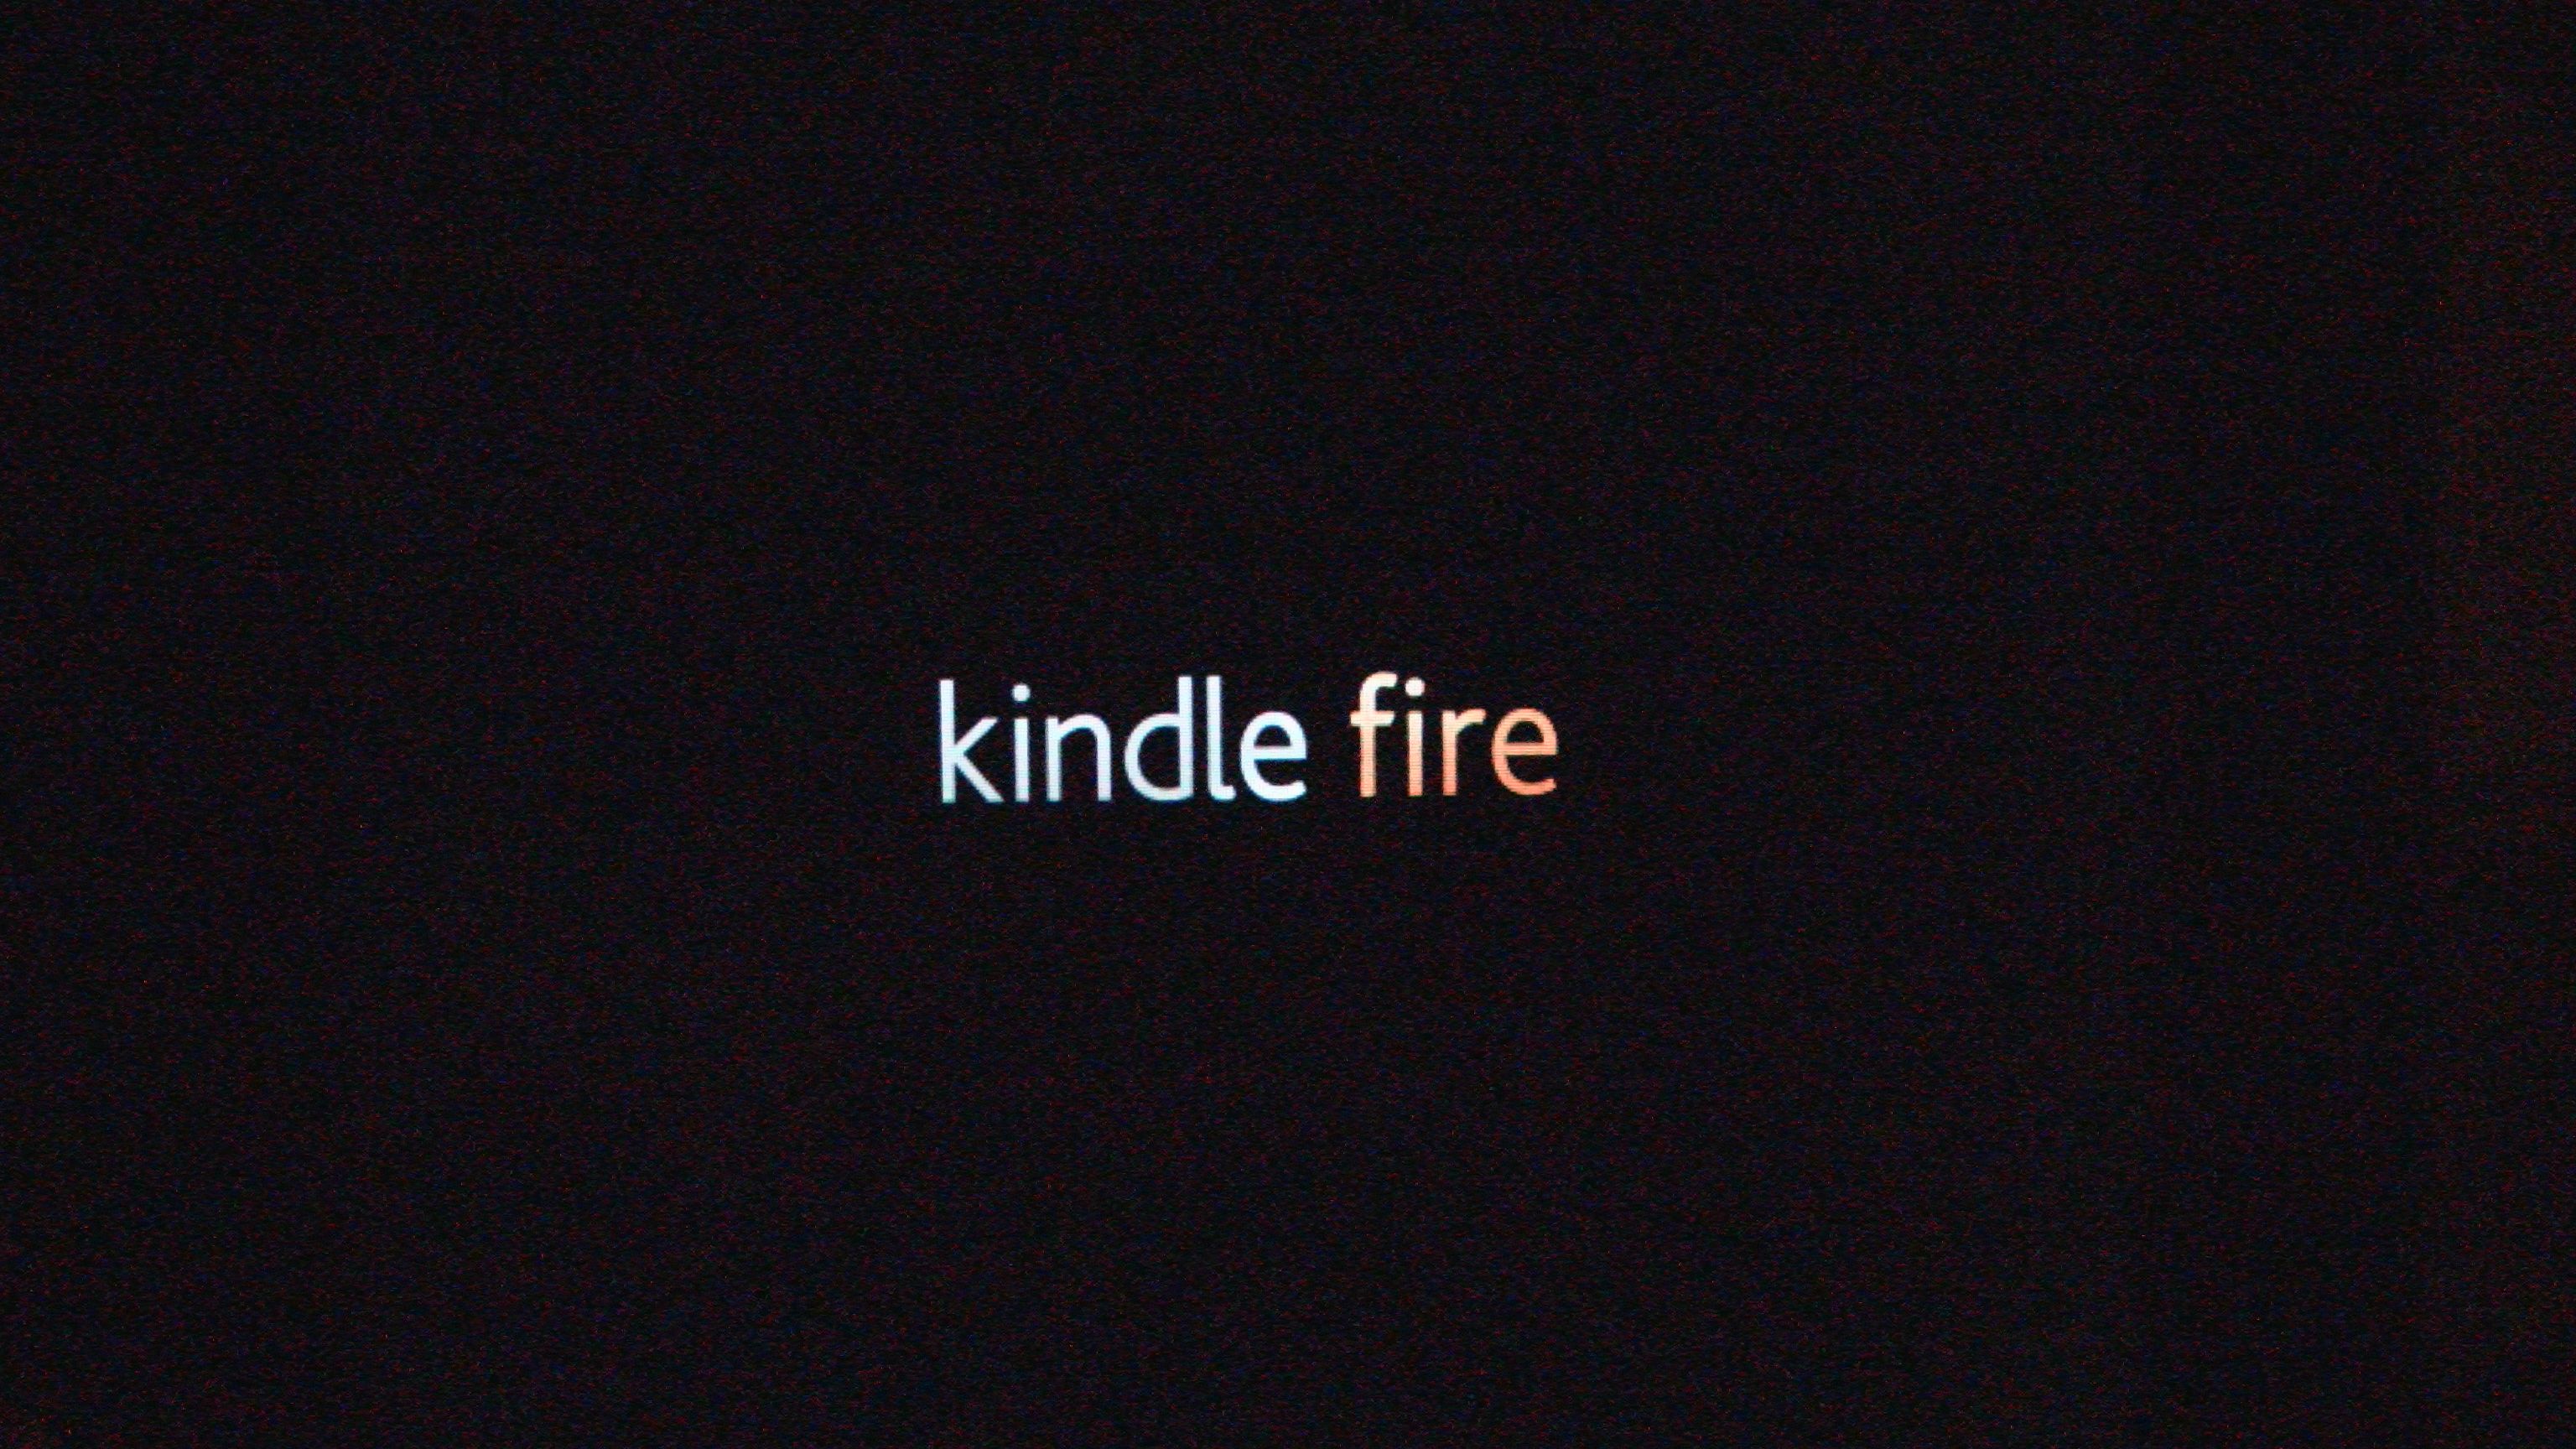 Free Download Amazons New Kindle Fire Tablet Is Hot Owner Review Booya Gadget 3072x1728 For Your Desktop Mobile Tablet Explore 50 Amazon Fire Wallpaper Free Kindle Fire Hd Cool